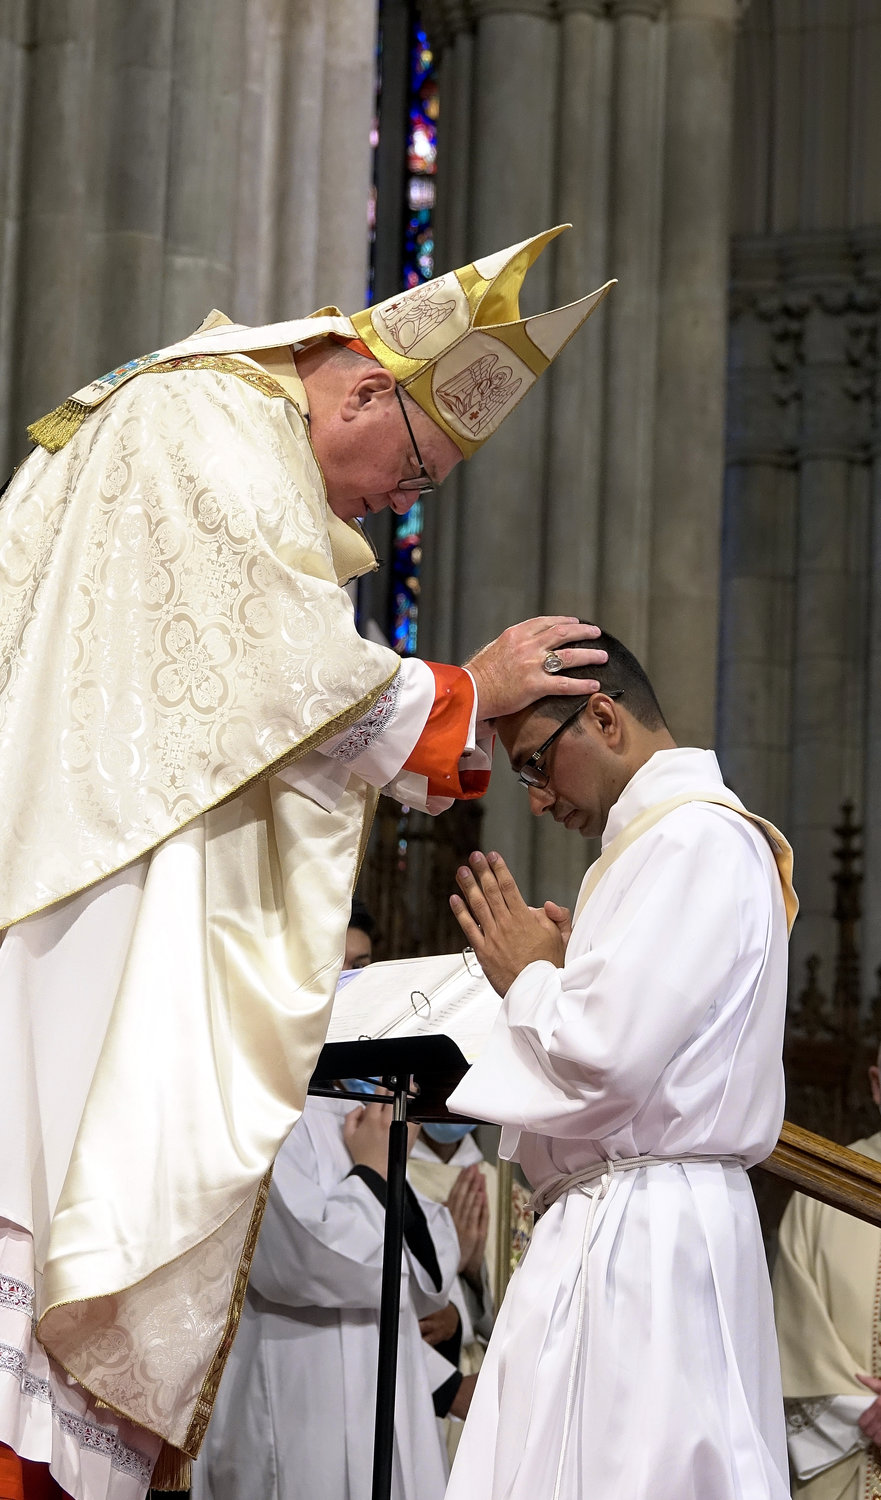 Cardinal Dolan lays hands on Father Roland Pereira, M.Id., during the Rite of Ordination.